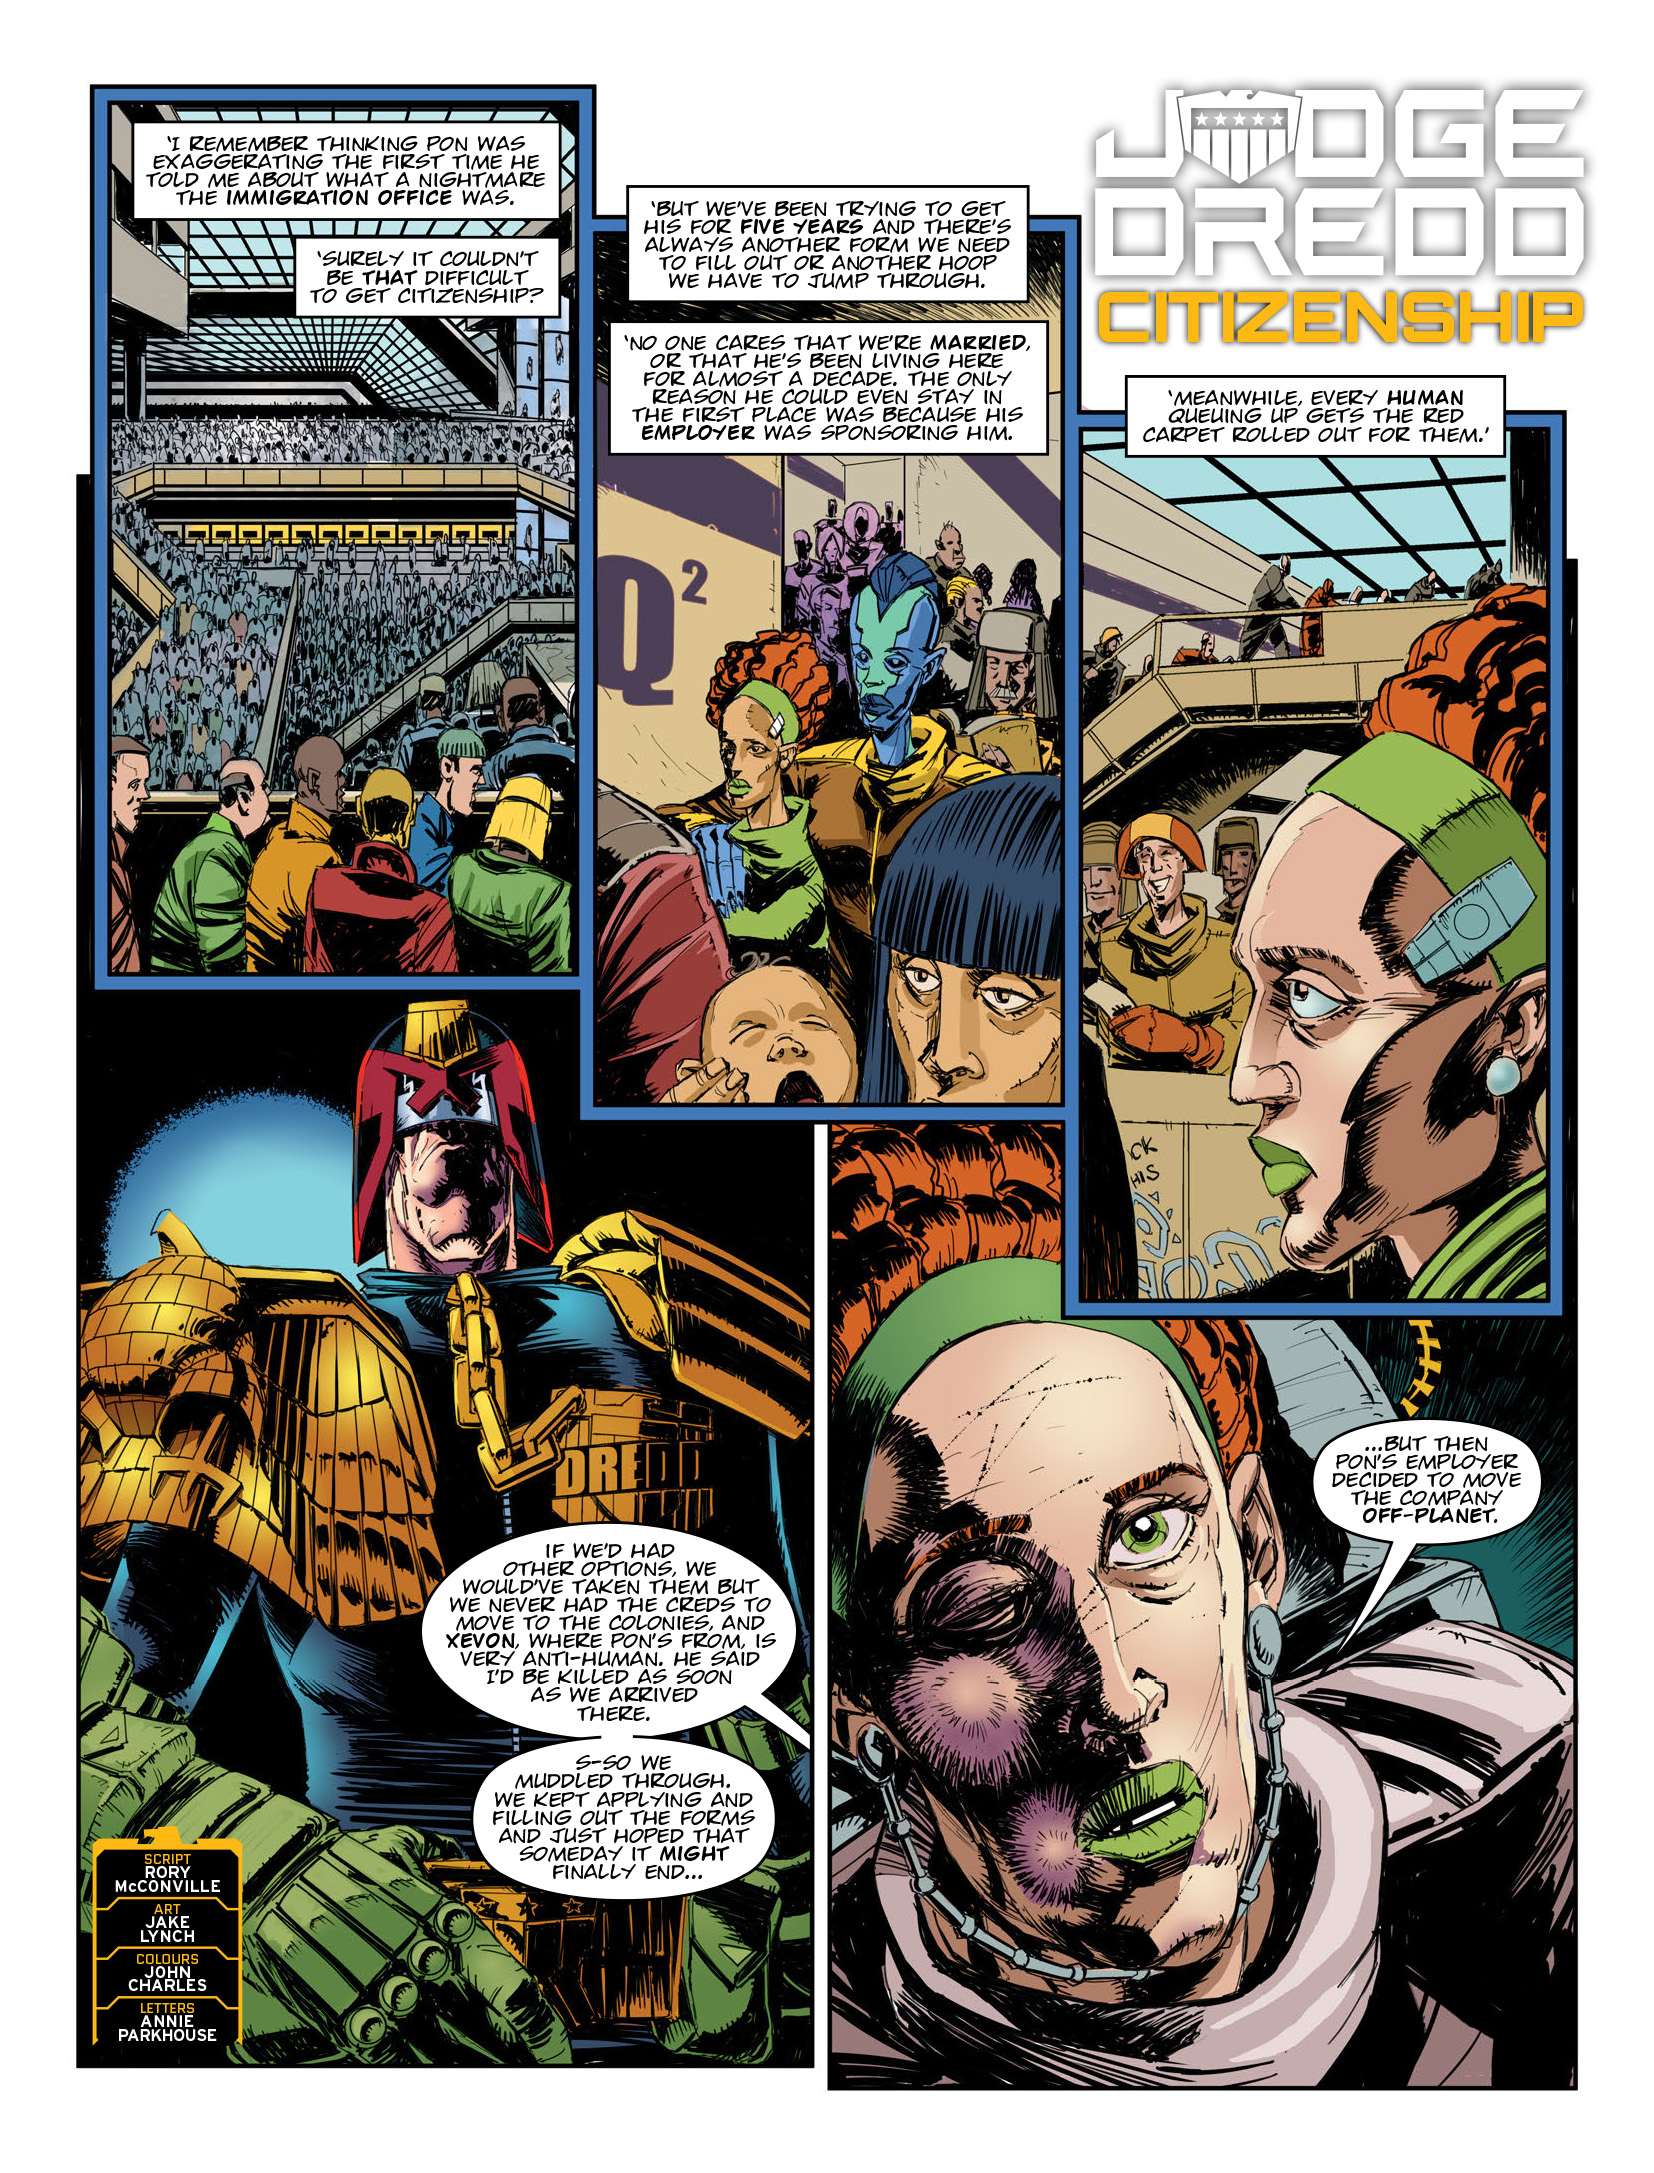 2000 AD: Chapter 2123 - Page 3